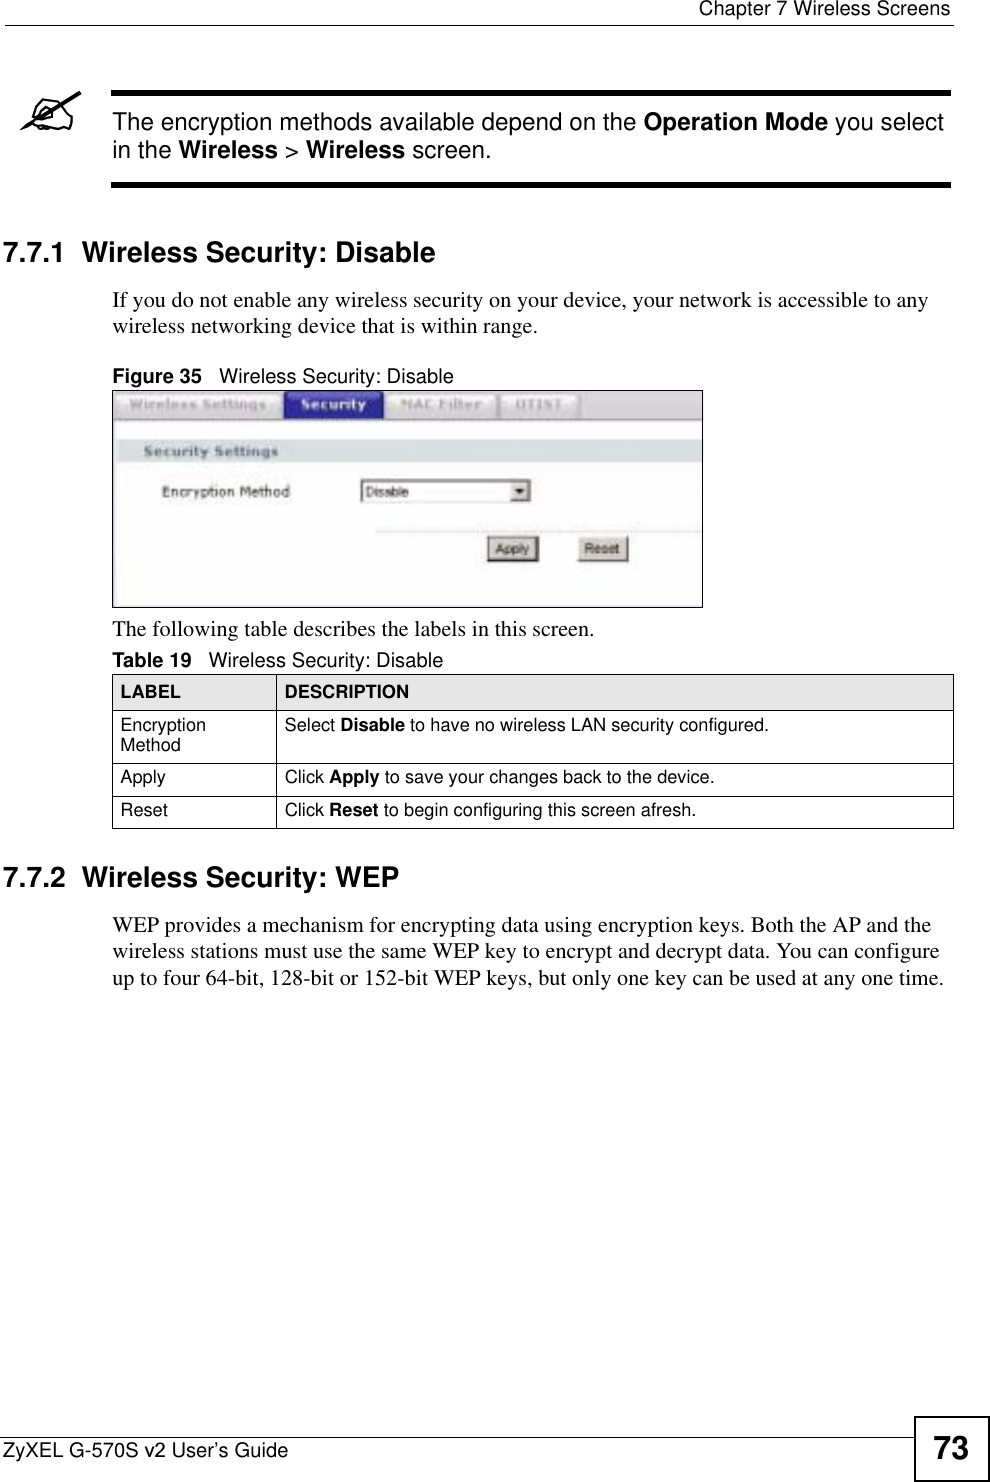  Chapter 7 Wireless ScreensZyXEL G-570S v2 User’s Guide 73&quot;The encryption methods available depend on the Operation Mode you select in the Wireless &gt; Wireless screen.7.7.1  Wireless Security: Disable If you do not enable any wireless security on your device, your network is accessible to any wireless networking device that is within range.Figure 35   Wireless Security: DisableThe following table describes the labels in this screen. 7.7.2  Wireless Security: WEP WEP provides a mechanism for encrypting data using encryption keys. Both the AP and the wireless stations must use the same WEP key to encrypt and decrypt data. You can configure up to four 64-bit, 128-bit or 152-bit WEP keys, but only one key can be used at any one time.Table 19   Wireless Security: DisableLABEL DESCRIPTIONEncryption Method Select Disable to have no wireless LAN security configured.Apply Click Apply to save your changes back to the device.Reset Click Reset to begin configuring this screen afresh.